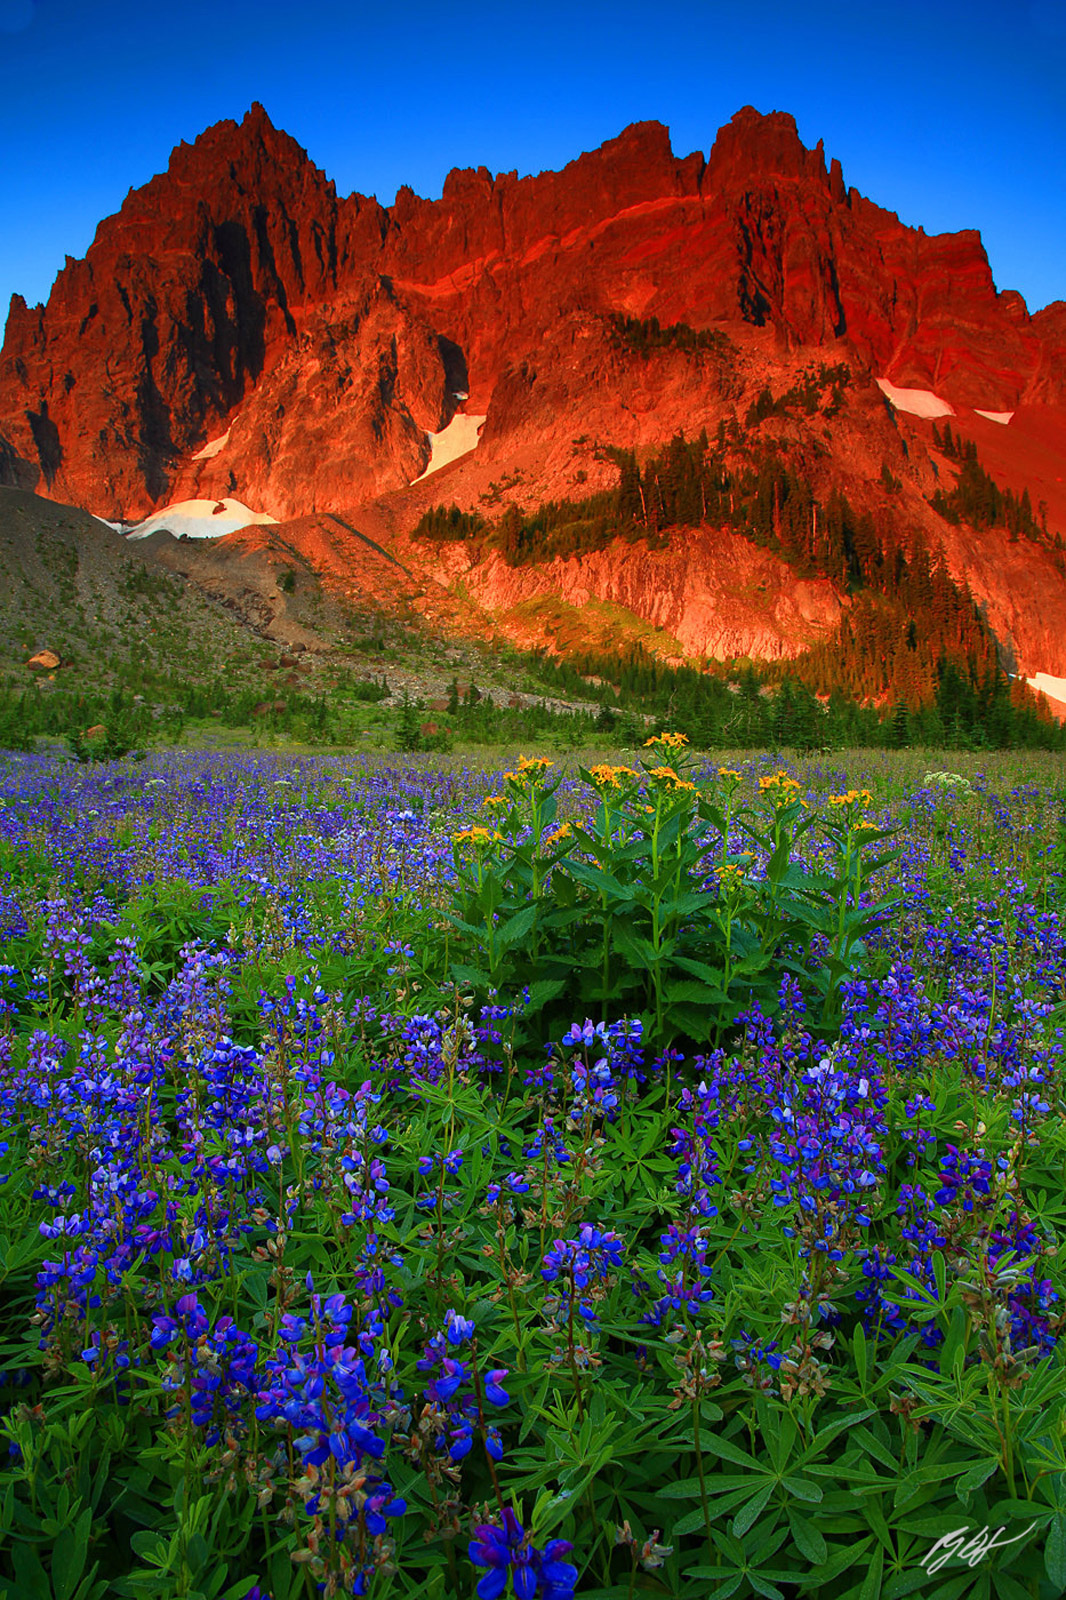 Sunrise Wildflowers and Three Fingered Jack in the Mt Jefferson Wilderness in Oregon